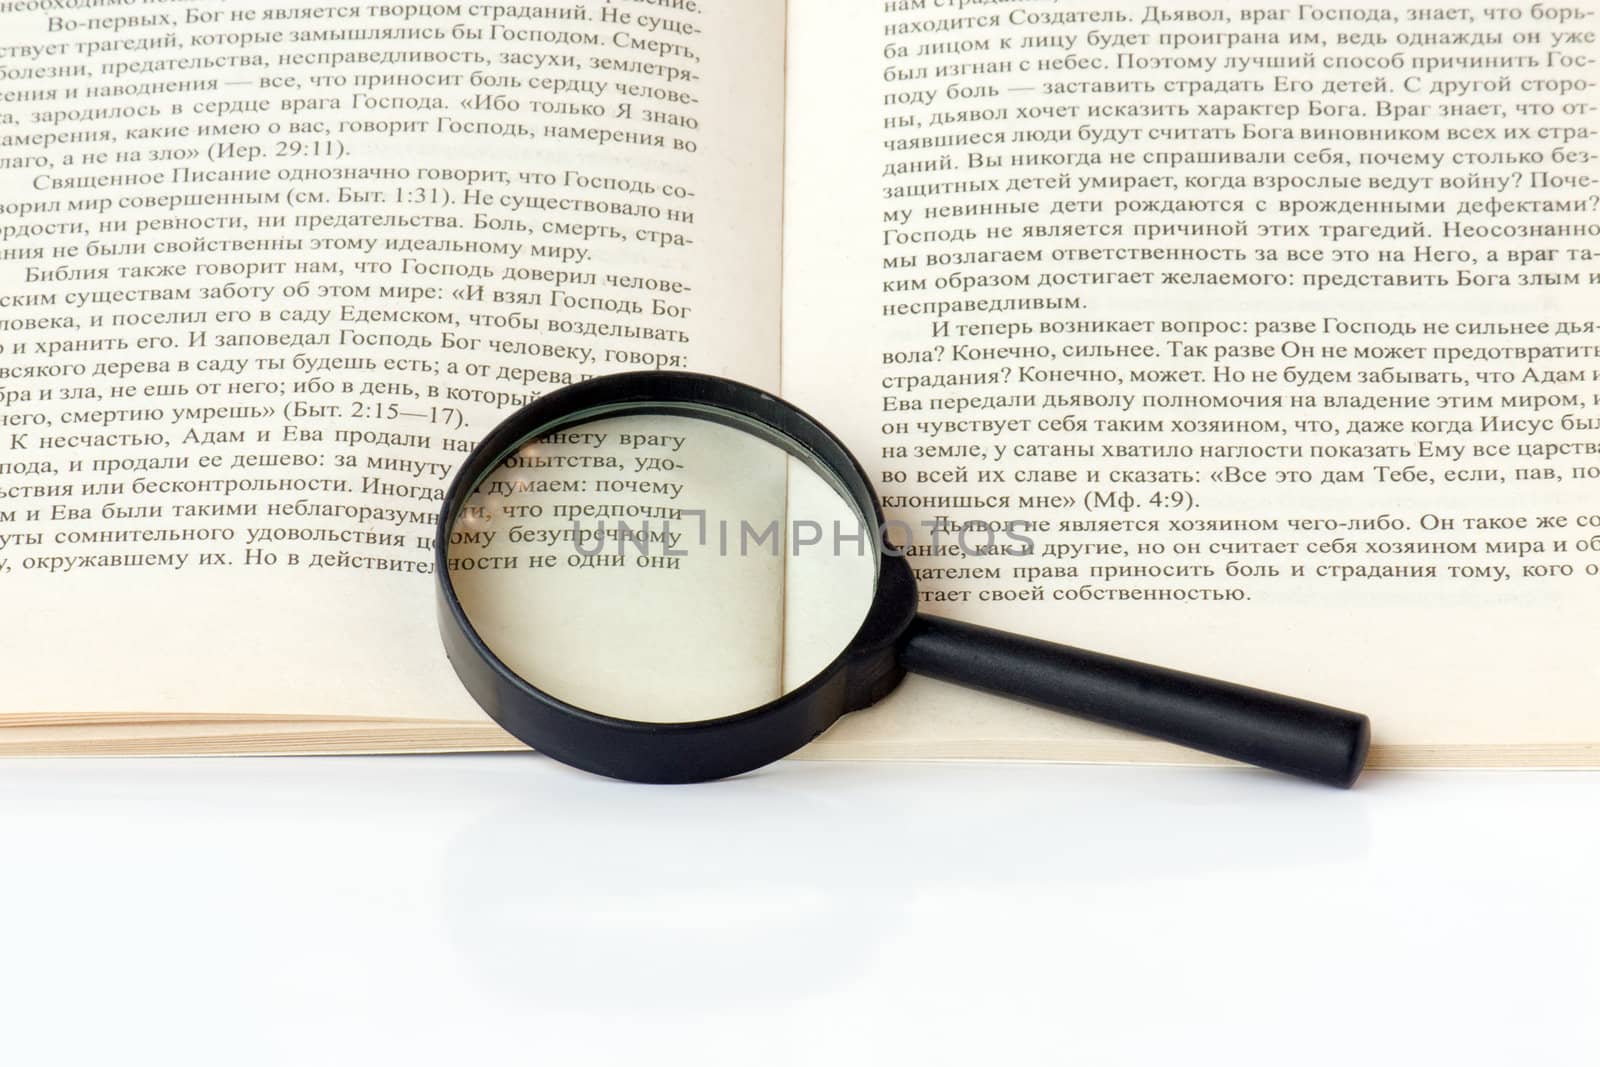 A magnifying glass is on the page of the book.